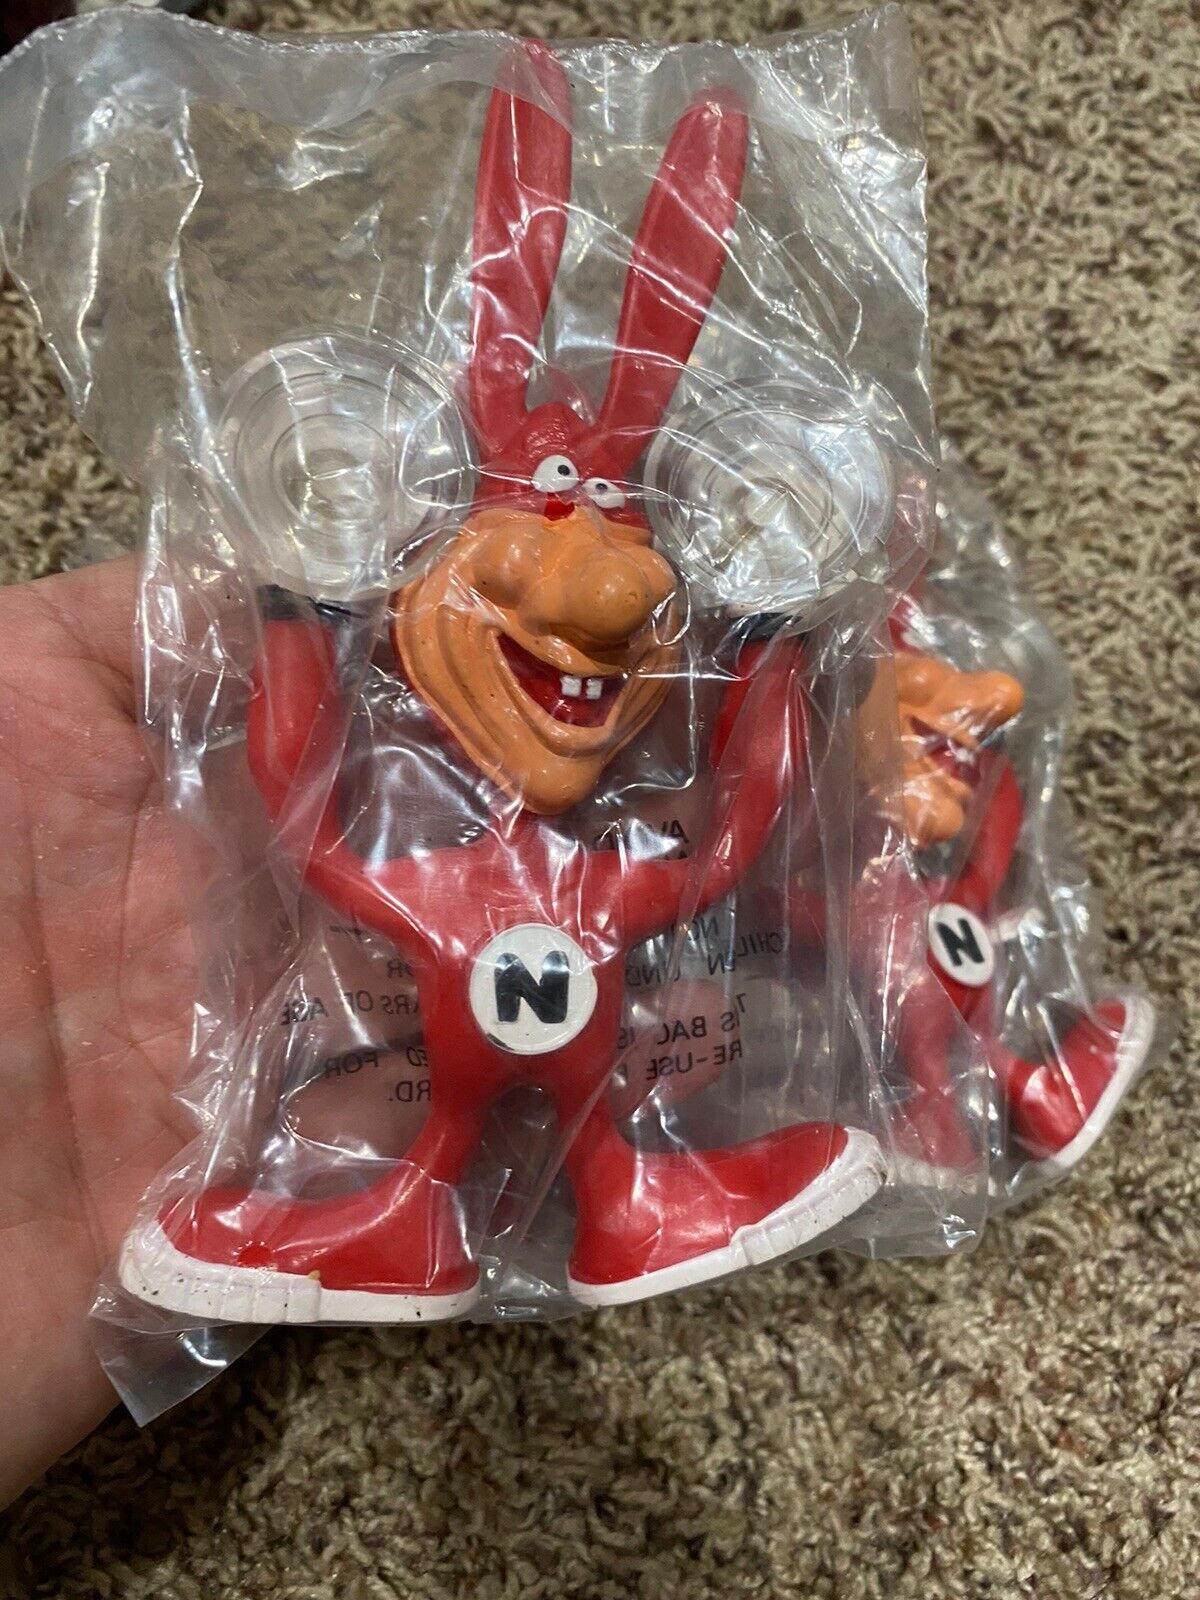 Dominos Pizza Avoid the Noid Window Suction Rubber Figurine Vintage 1989 Sealed